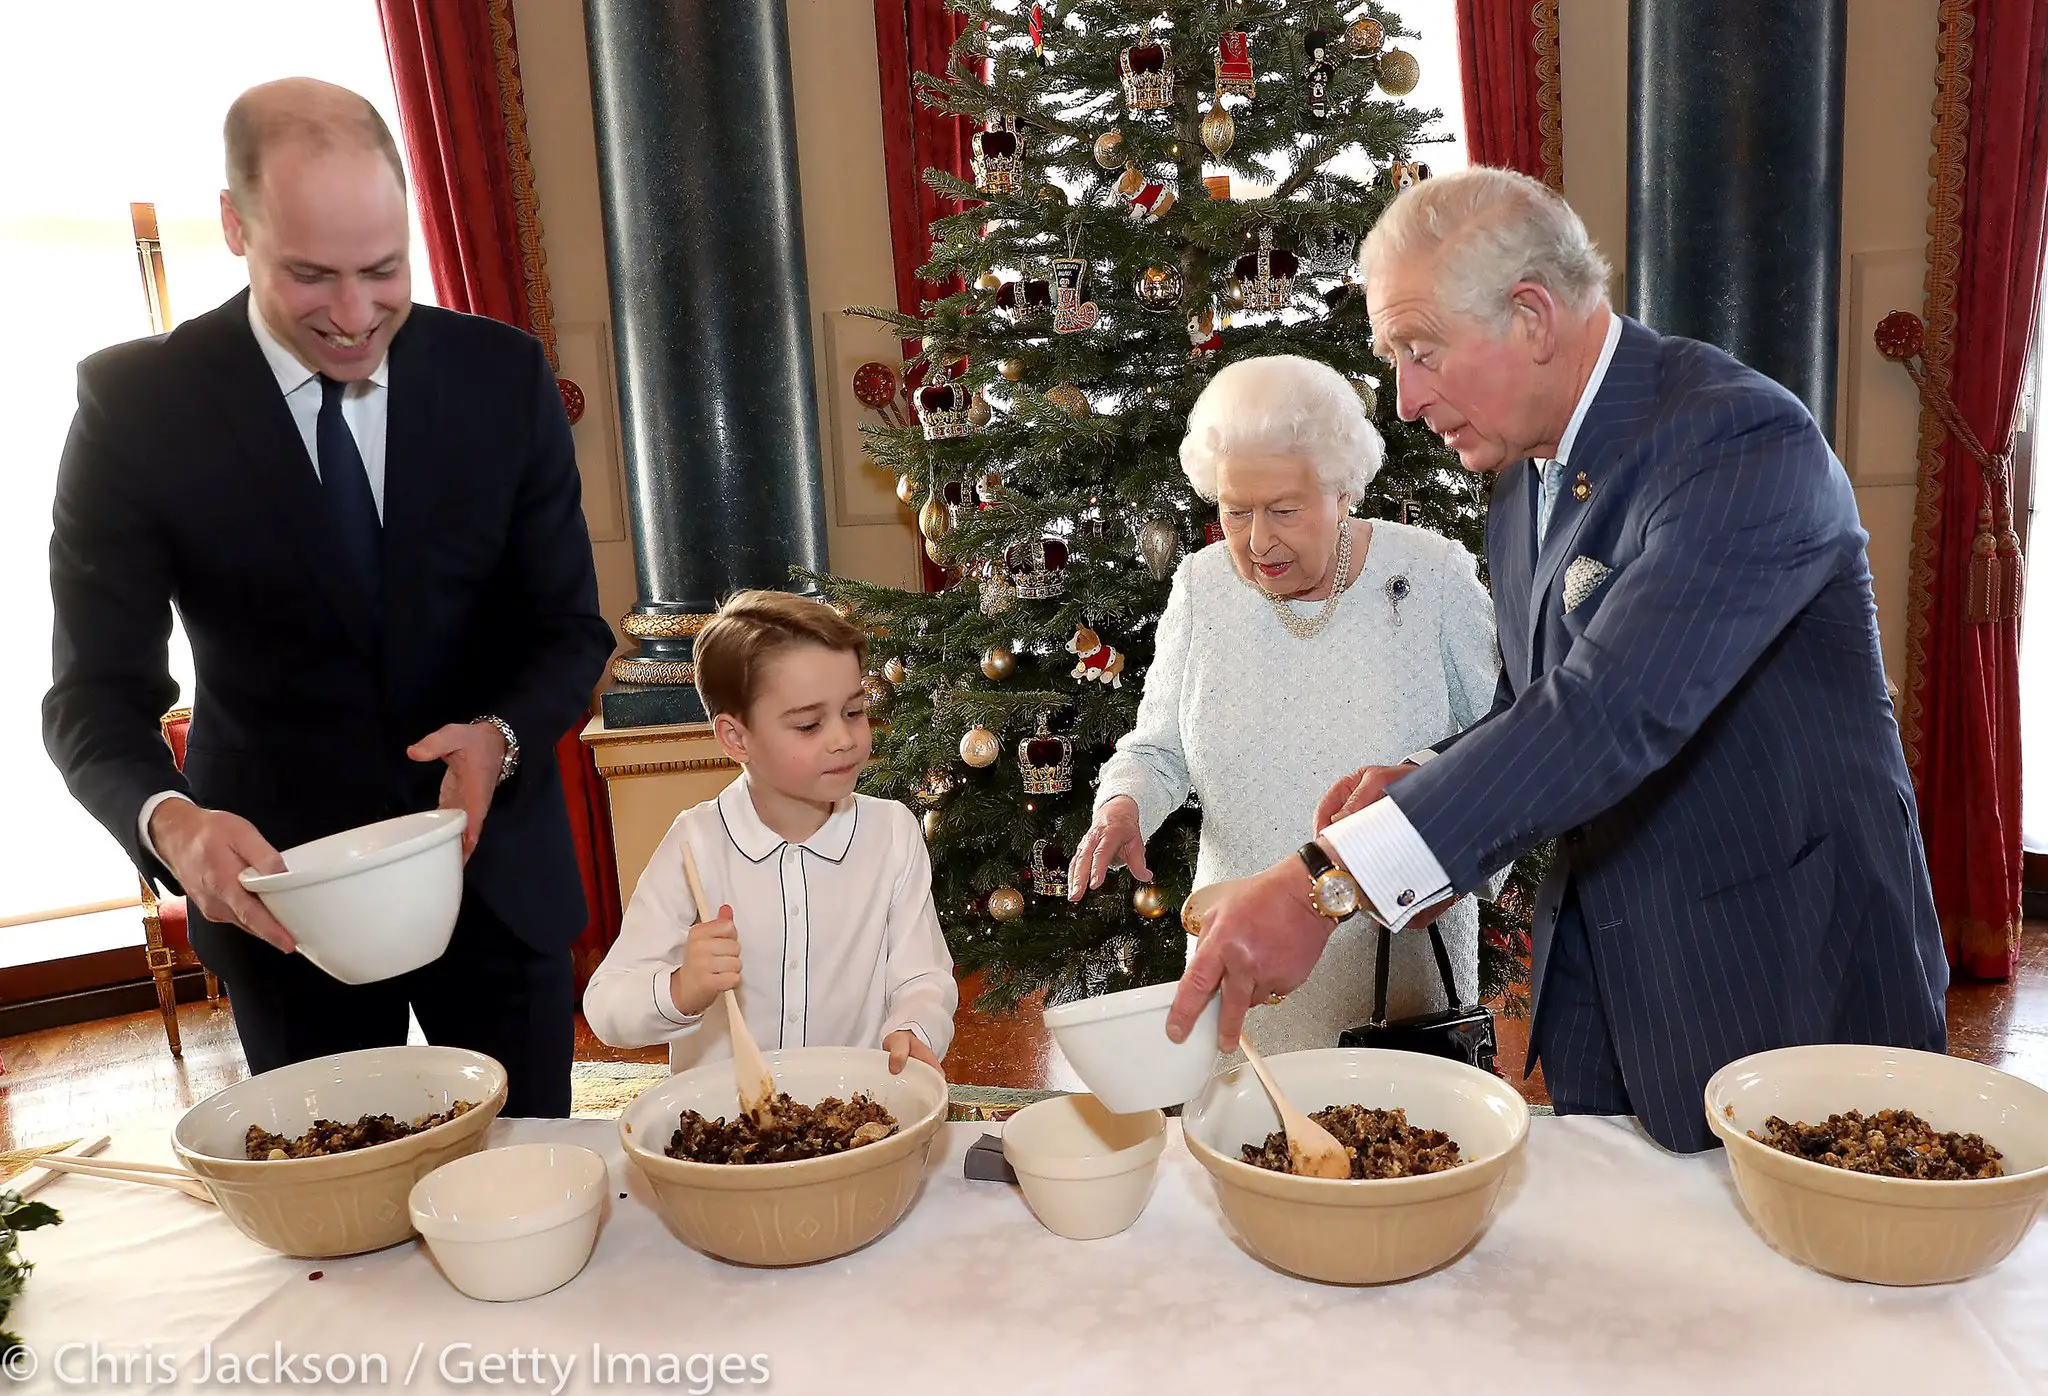 Prince George made puddings with Prince William, Prince Charles and Queen Elizabeth